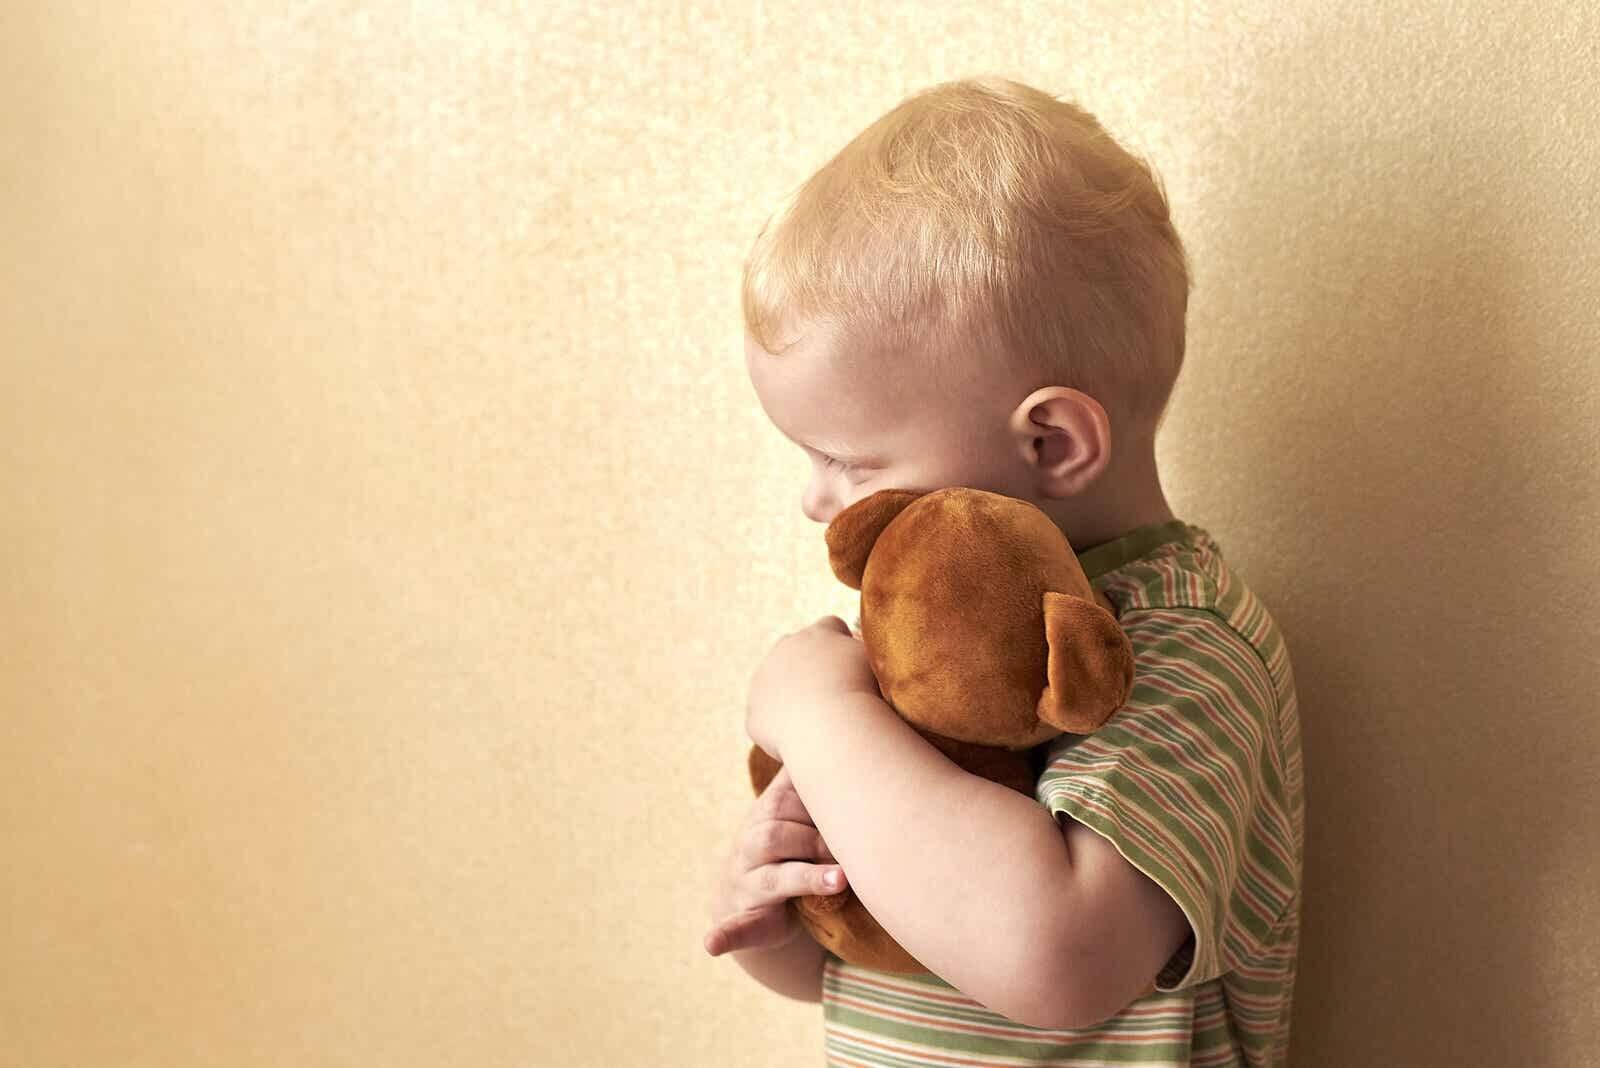 Child hugging a stuffed animal because he’s afraid of death.